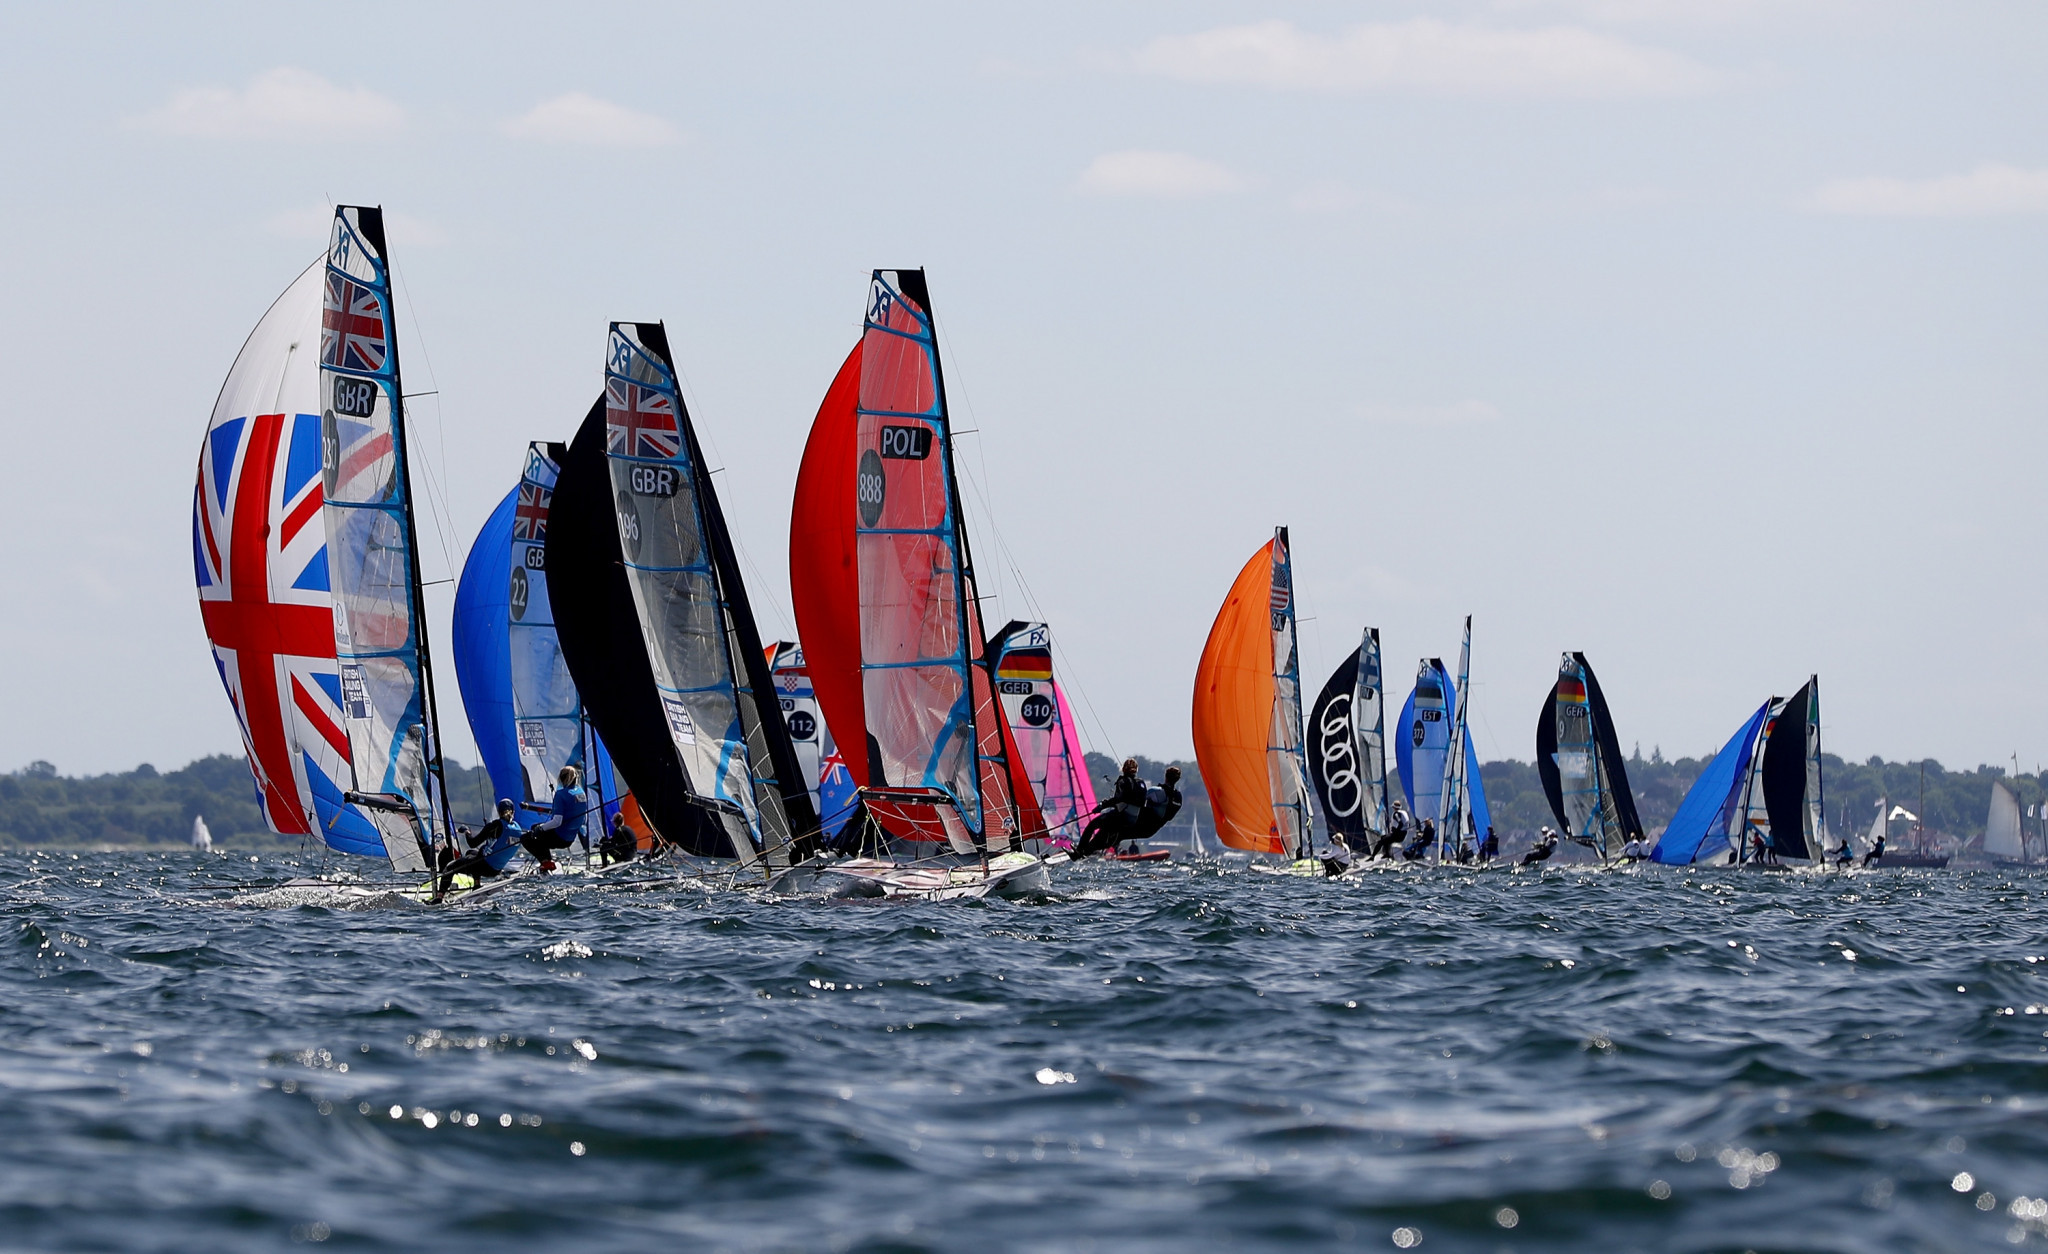 Van Aanholt and De Ruyter extend 49erFX lead on penultimate day of World Championships